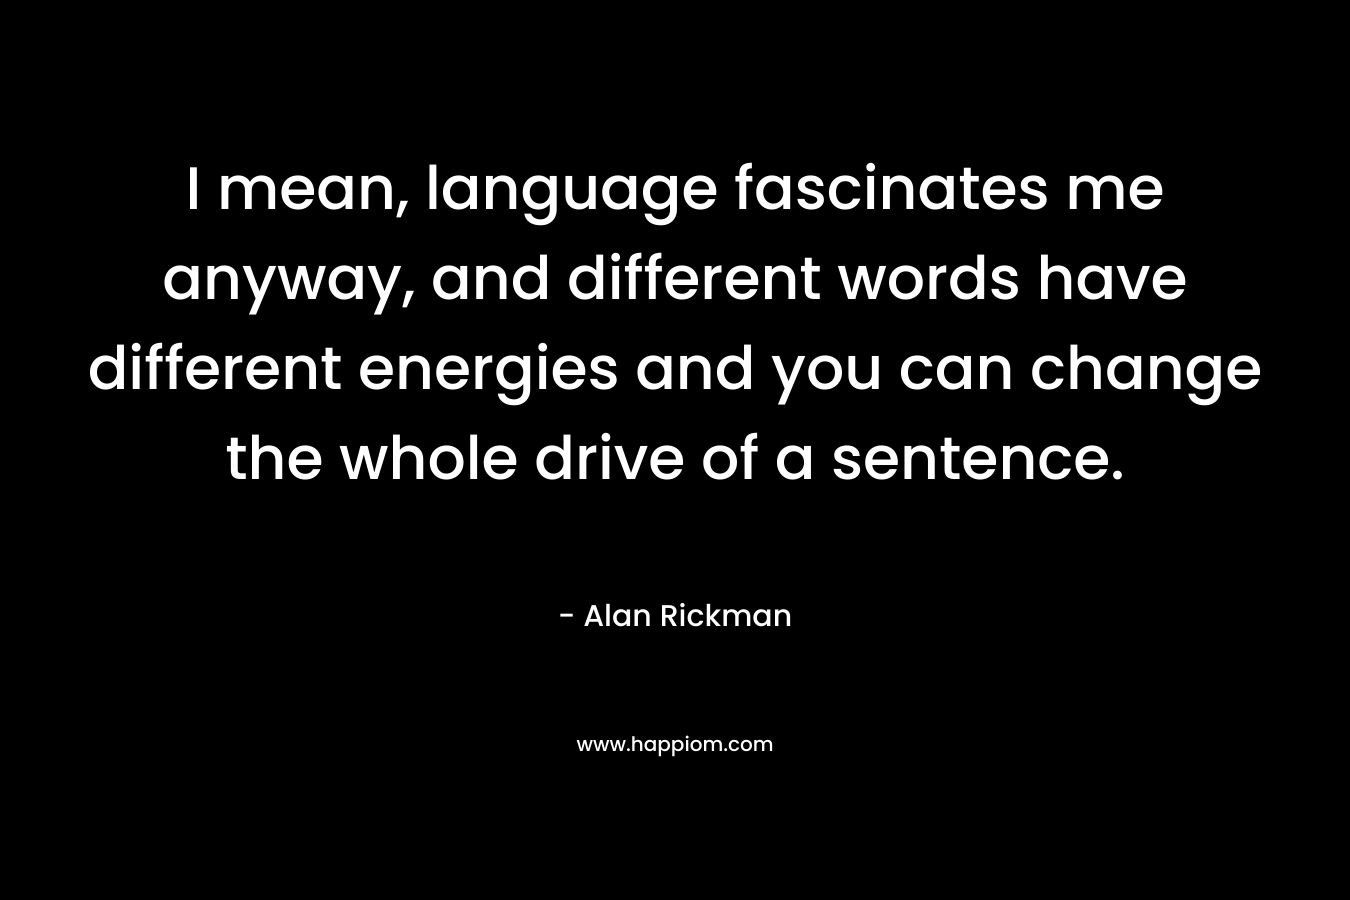 I mean, language fascinates me anyway, and different words have different energies and you can change the whole drive of a sentence. – Alan Rickman